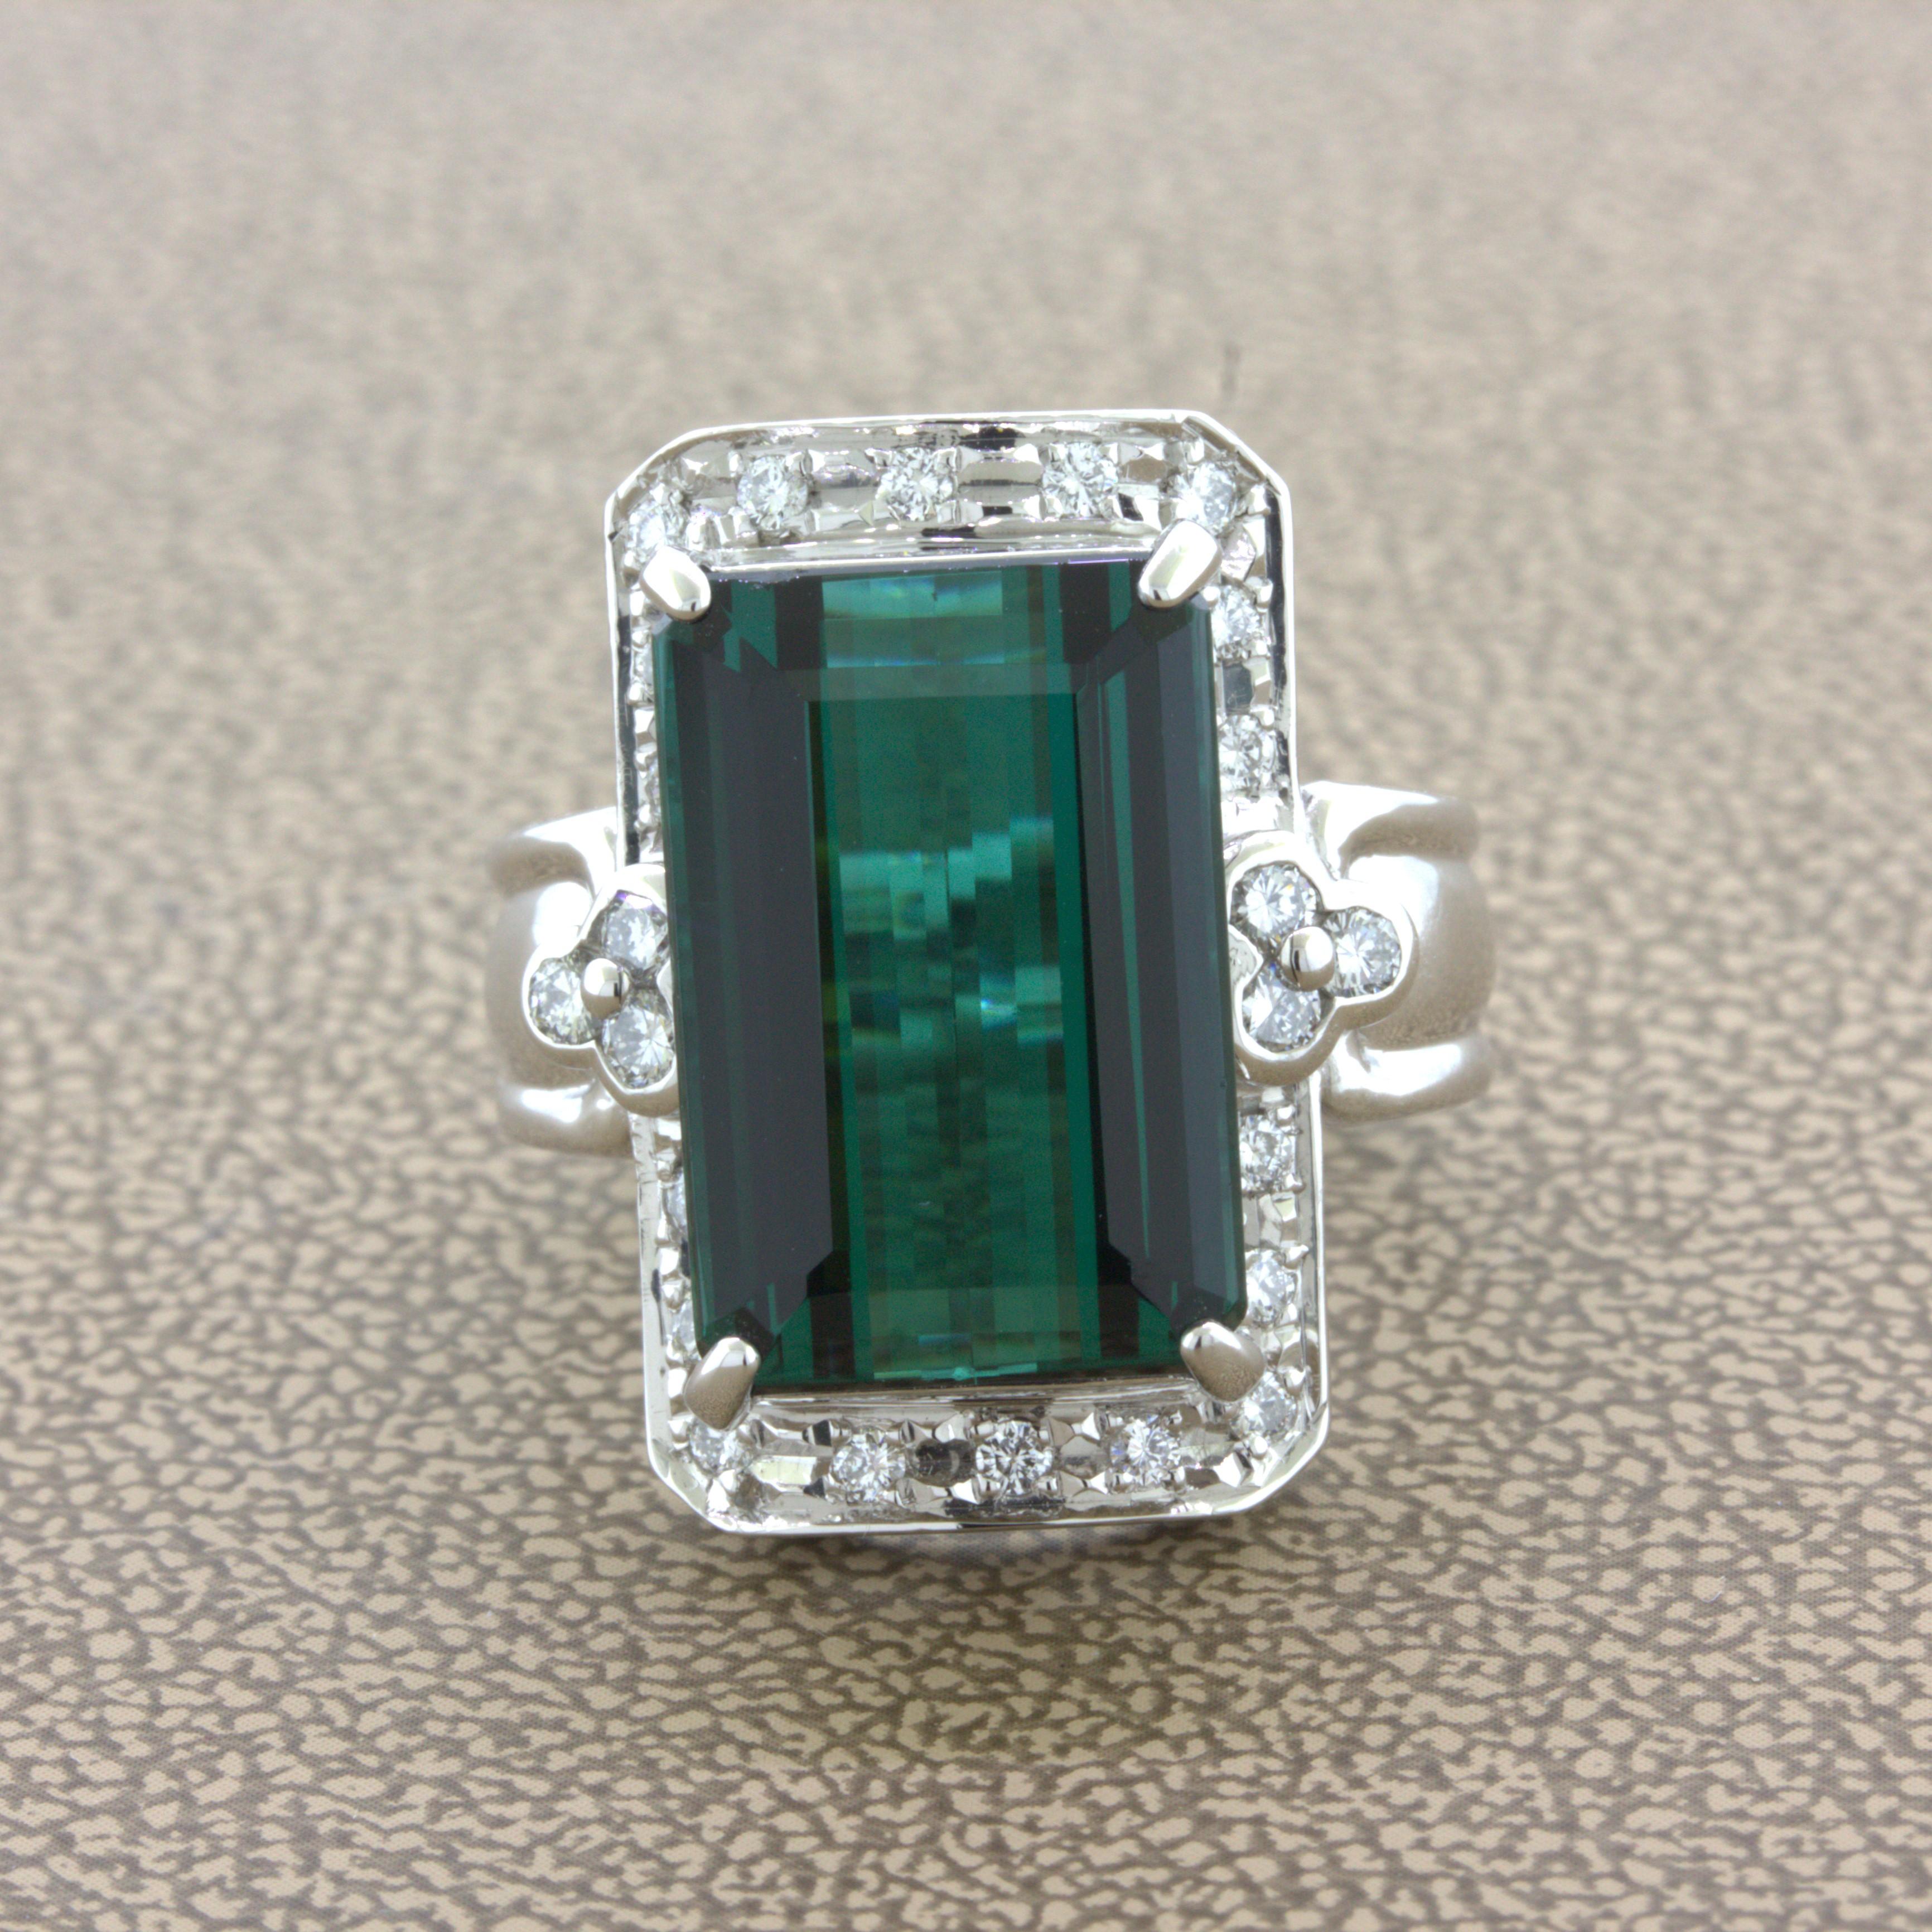 A fine neon blue-green indicolite tourmaline takes center stage of this platinum made cocktail ring. The tourmaline weighs an impressive 10.92 carats and has a sweet sharp and clean classic blue-green indicolite color. It is complemented by 0.40